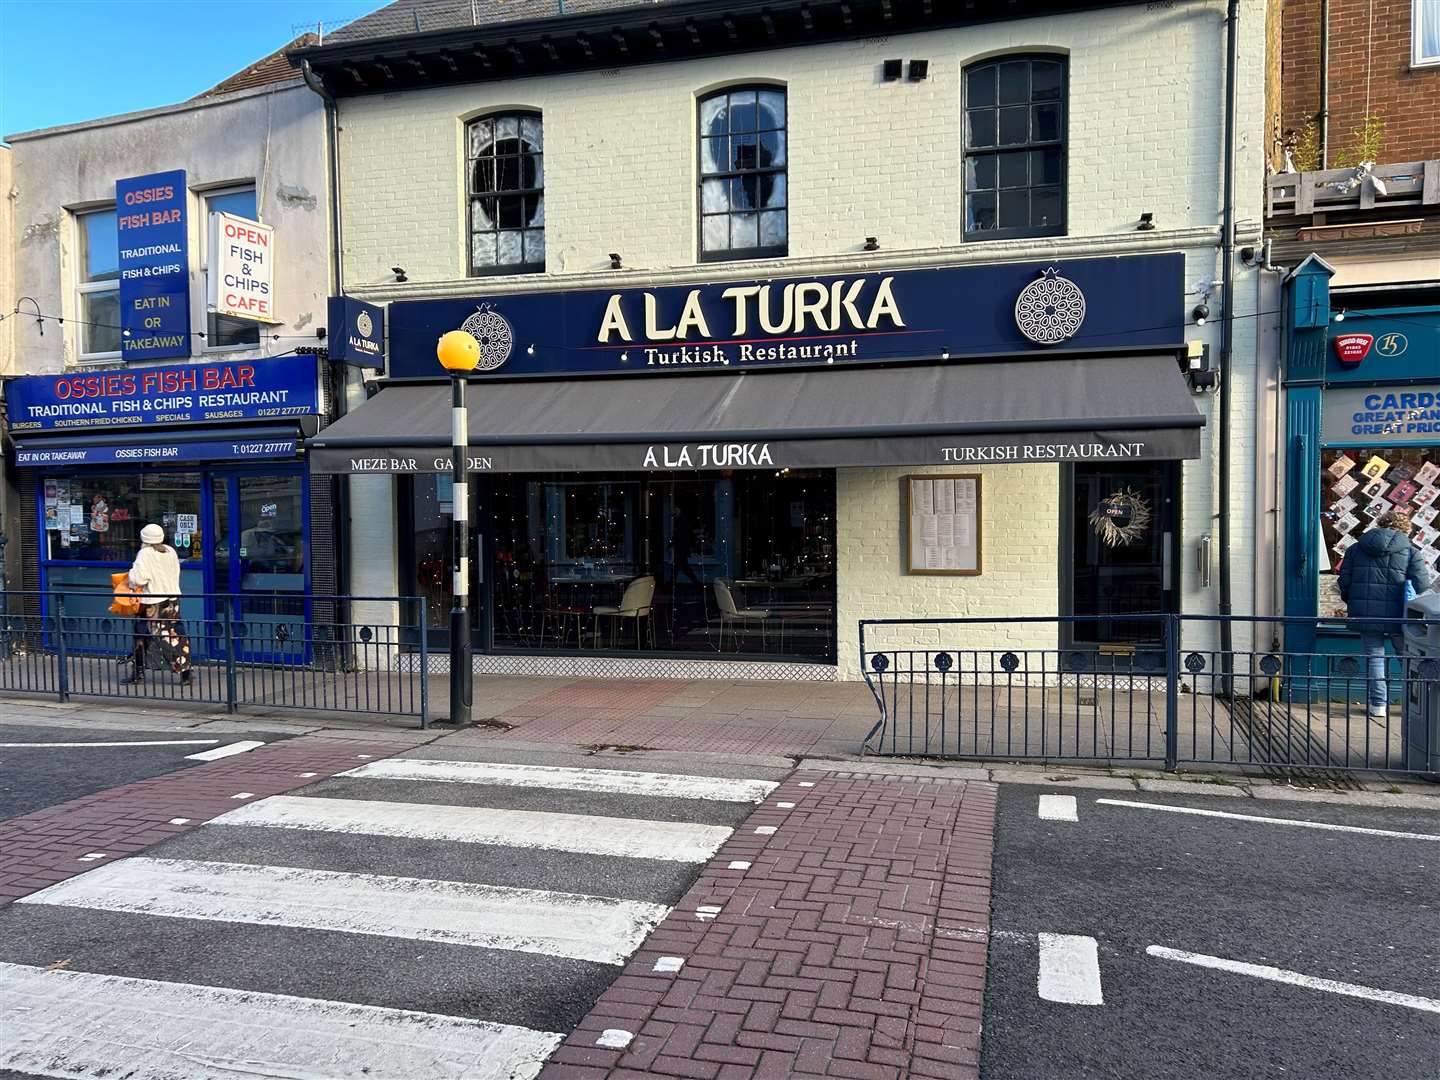 A La Turka in Whitstable High Street was formally a Jobcentre and pub